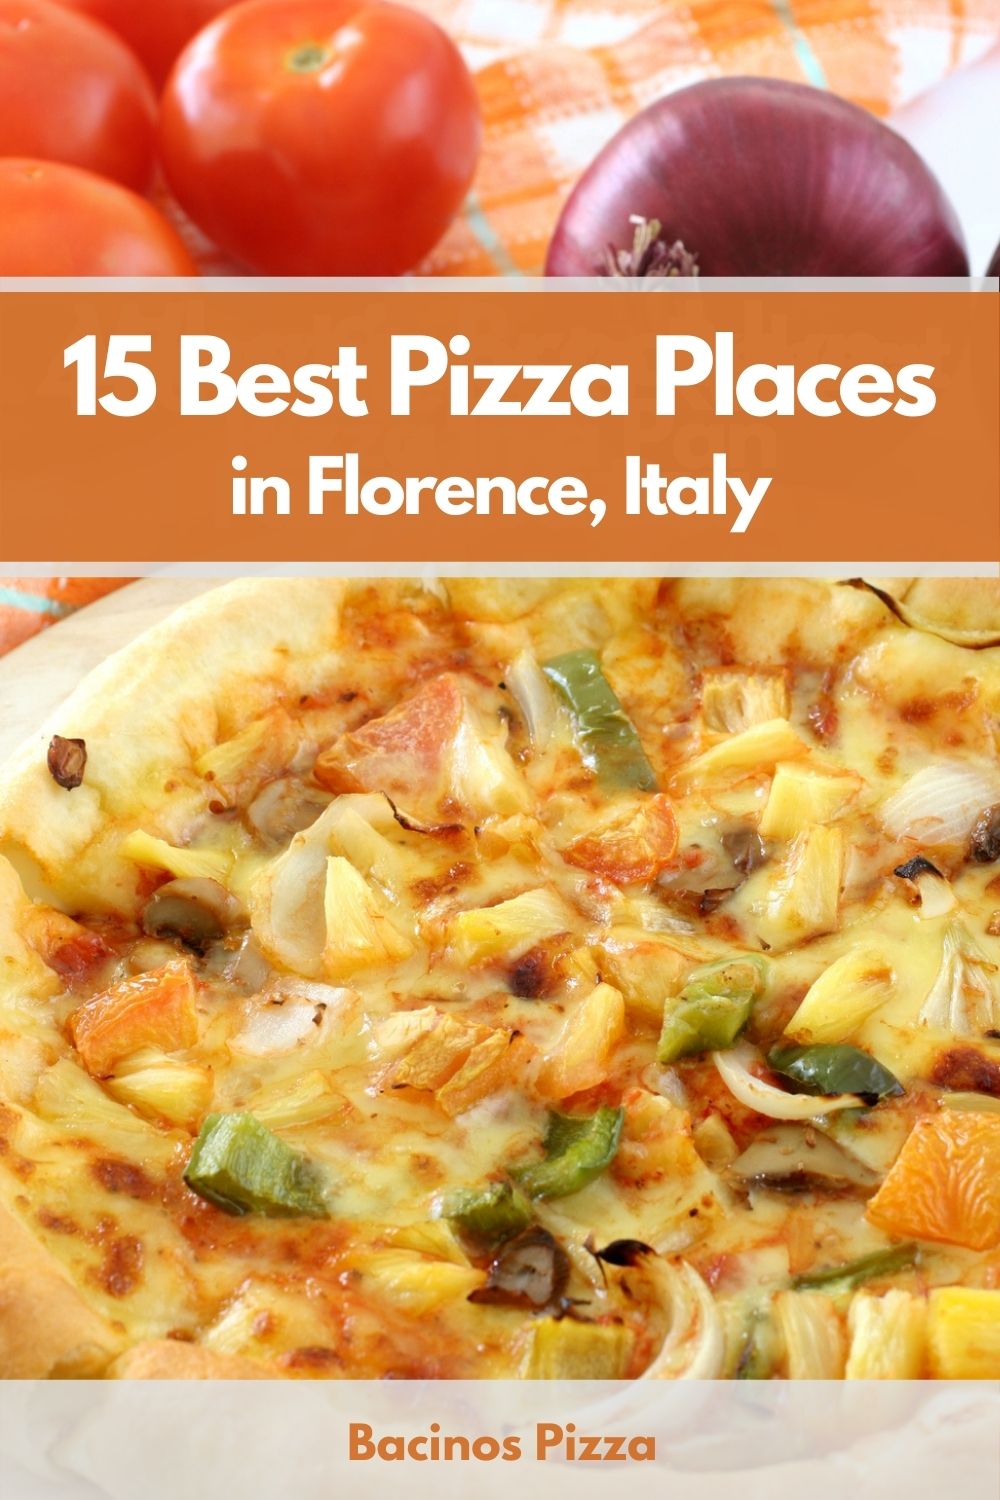 15 Best Pizza Places in Florence, Italy pin